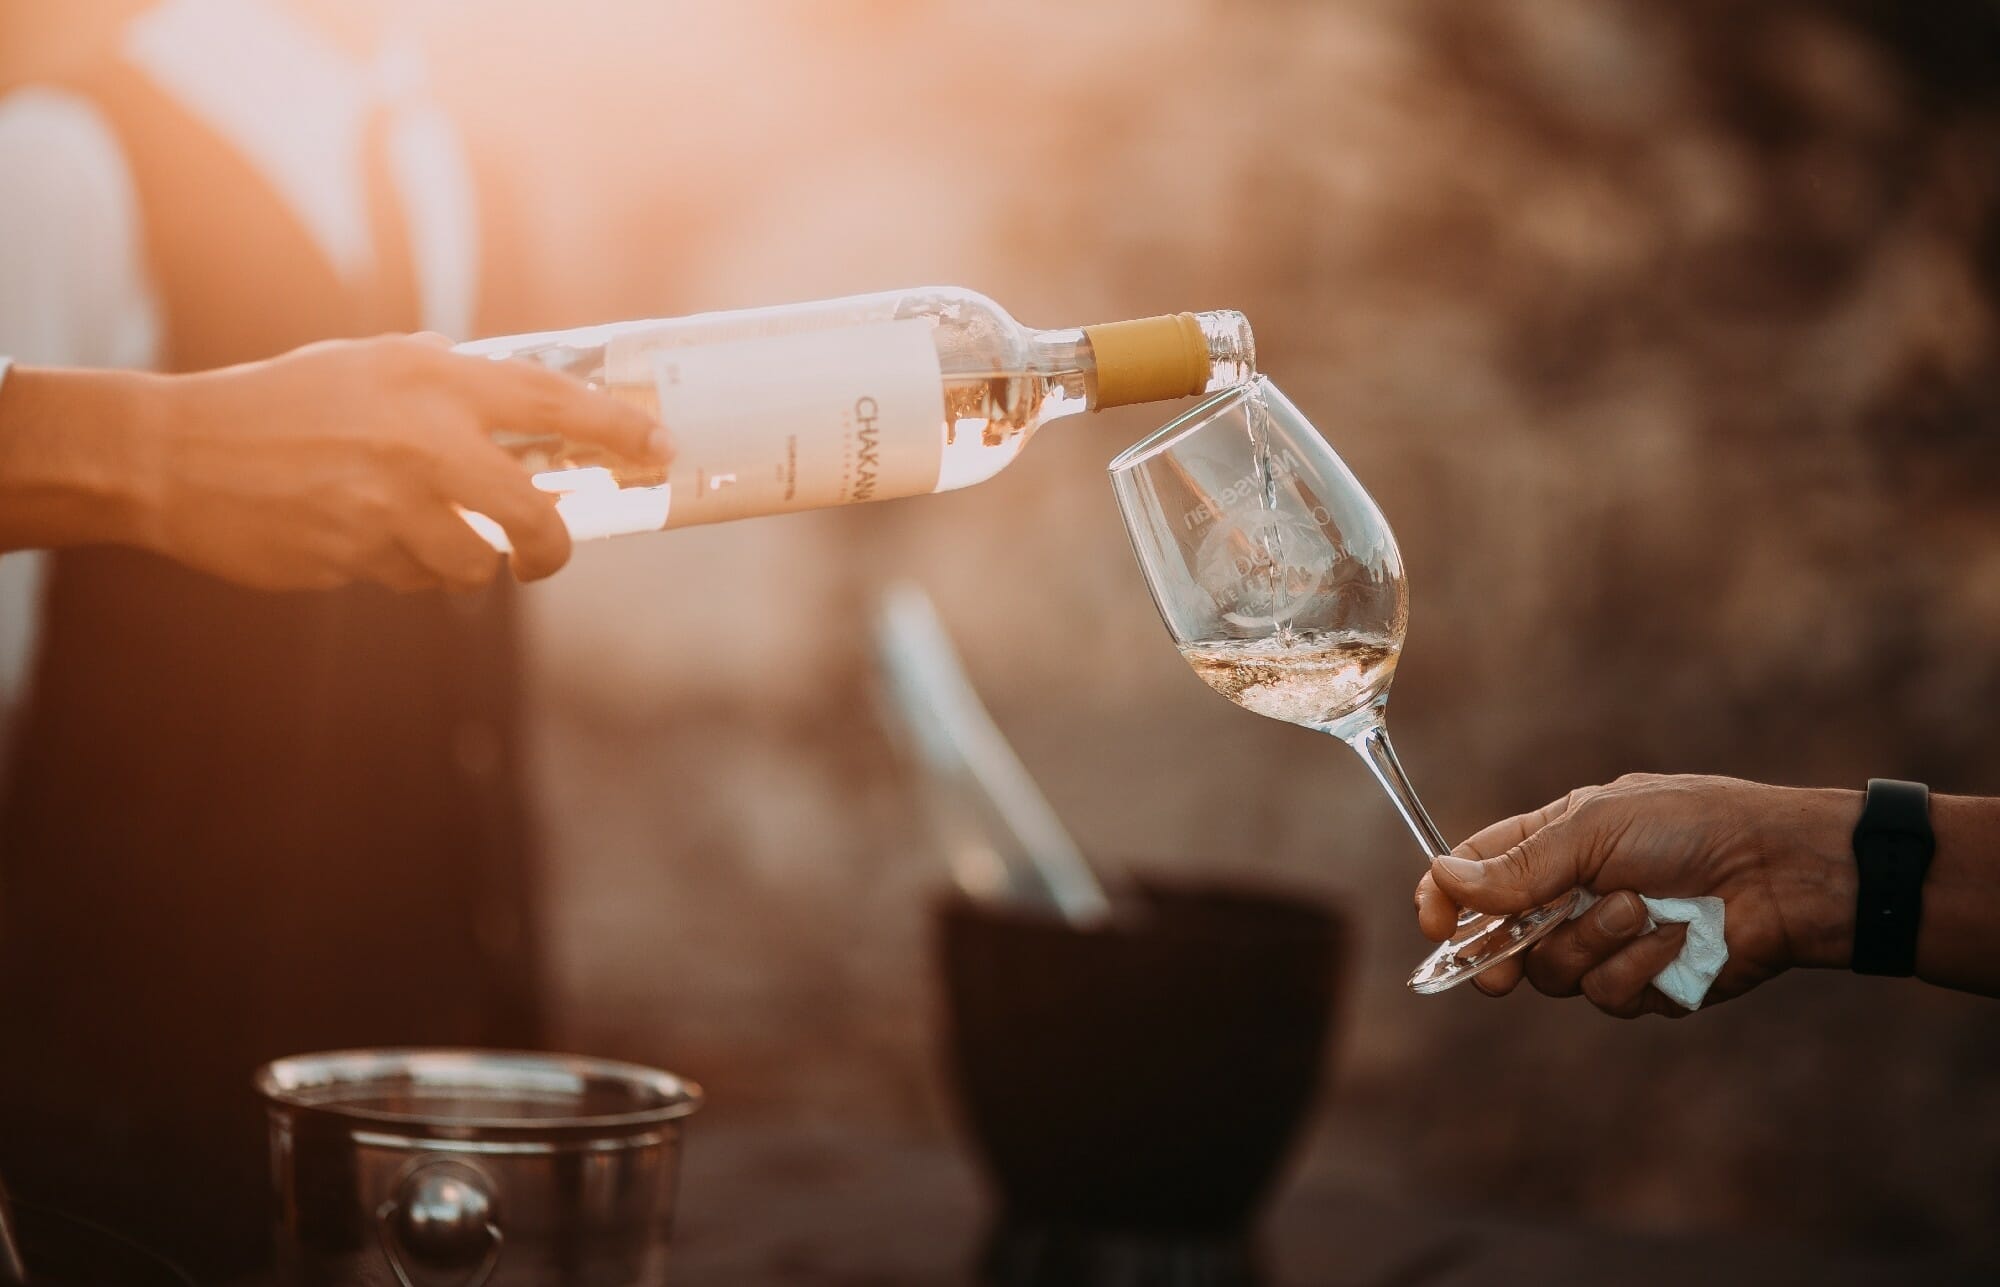 https://blog.saucey.com/wp-content/uploads/2021/06/how-many-glasses-of-wine-are-in-a-bottle_-saucey.-photo-by-douglas-lopez-on-unsplash.jpg